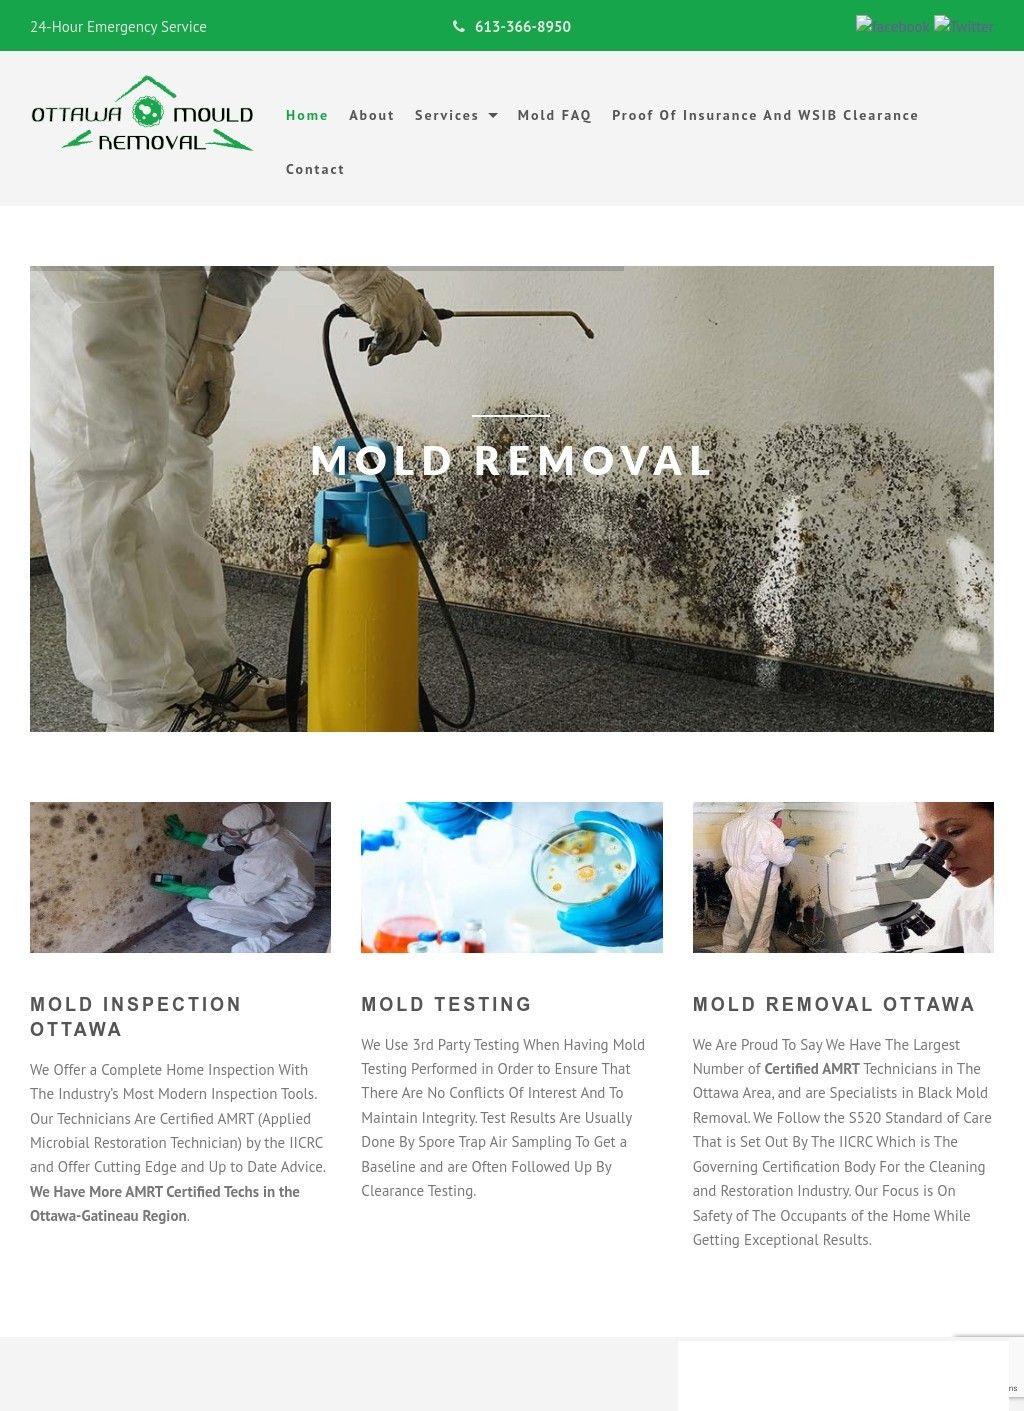 Mold Removal Services Ottawa